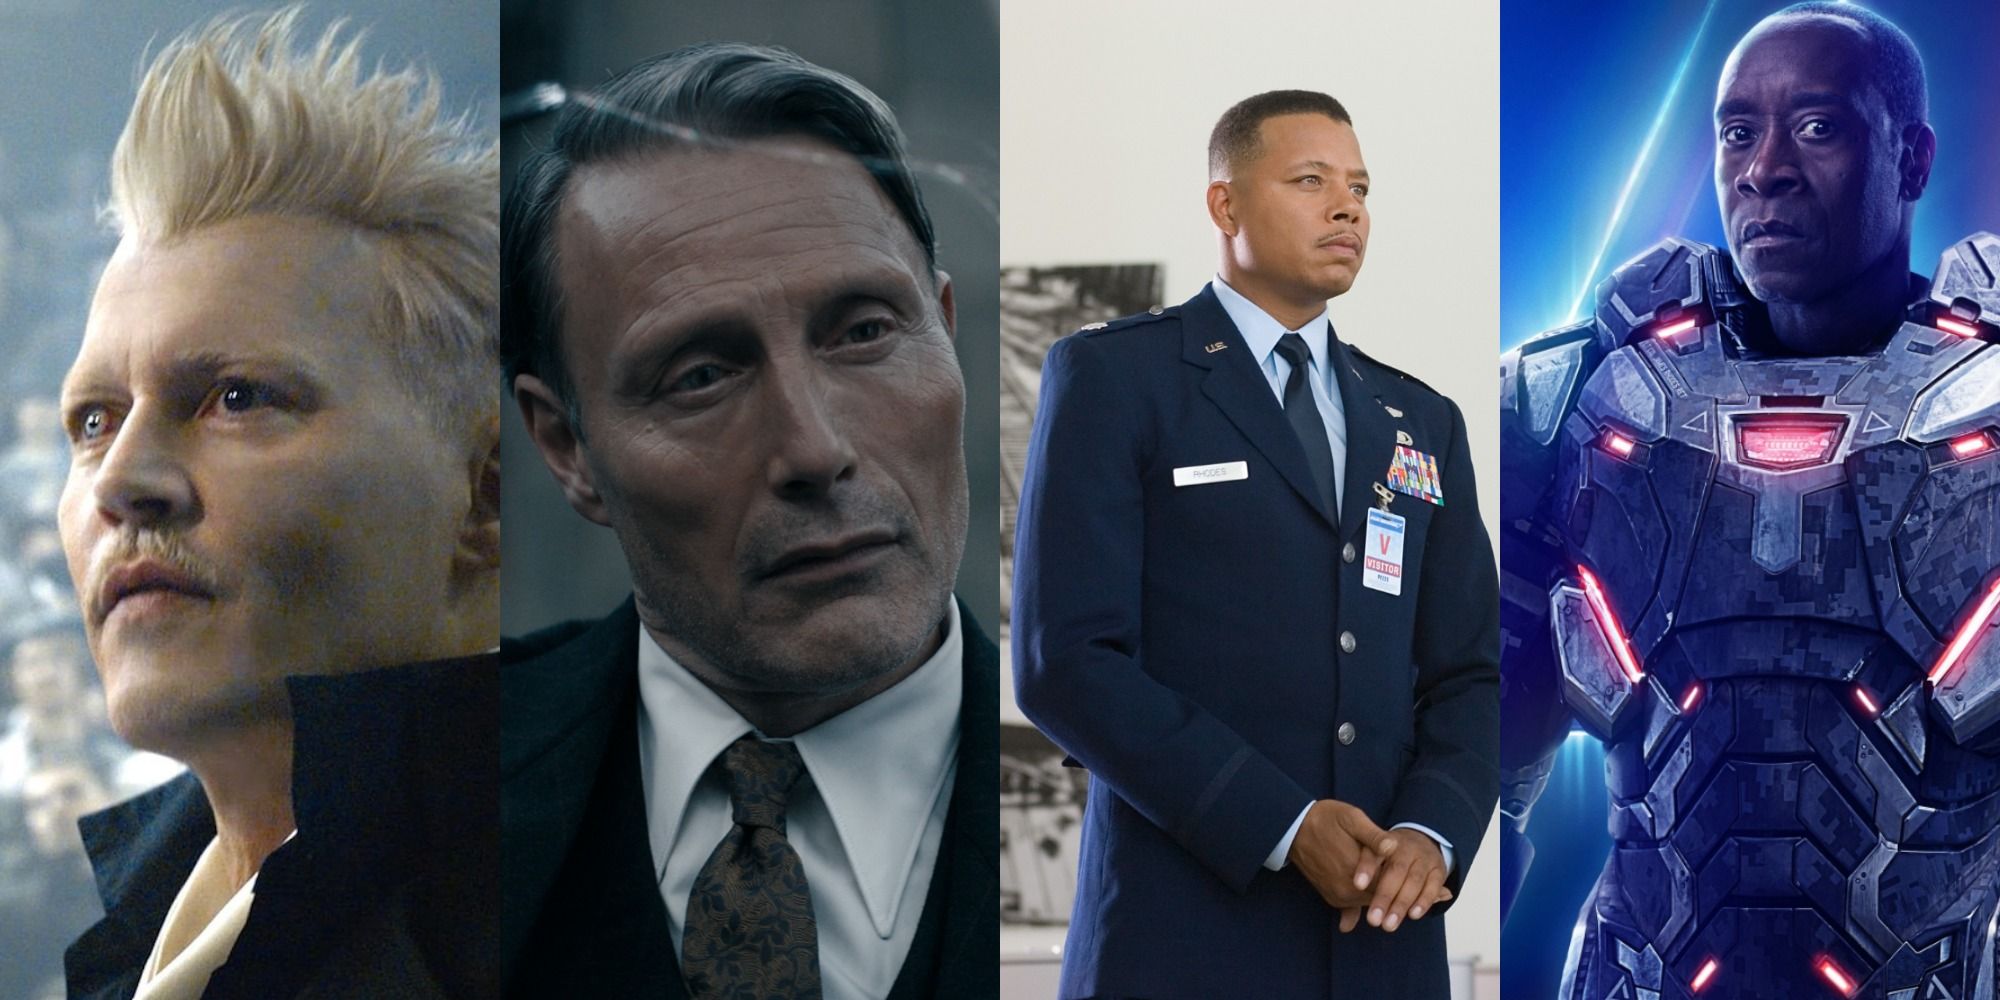 combined images of Johny Depp, Mads Mikkelsen, Terrence Howard, and Don Cheadle in various movies